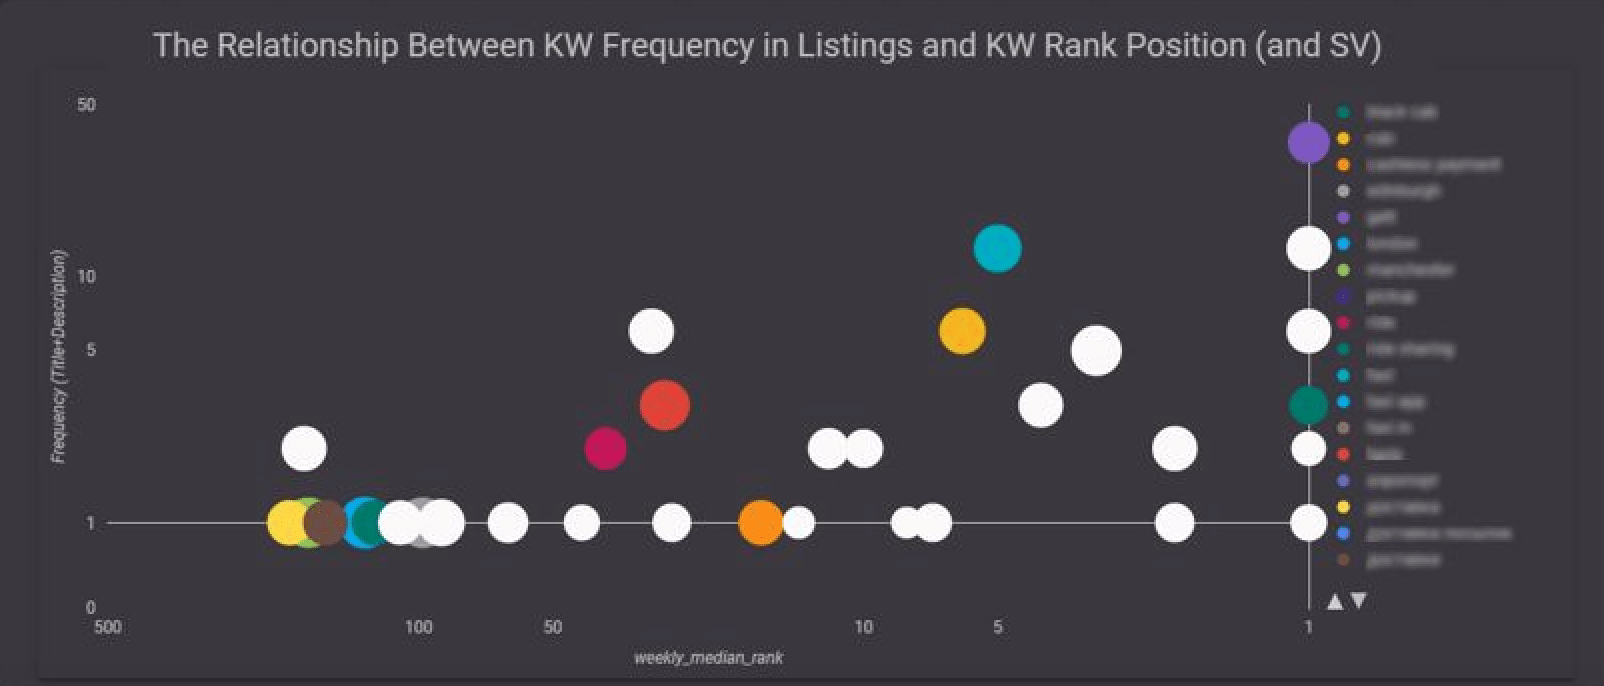 KW frequency in listings KW rank position